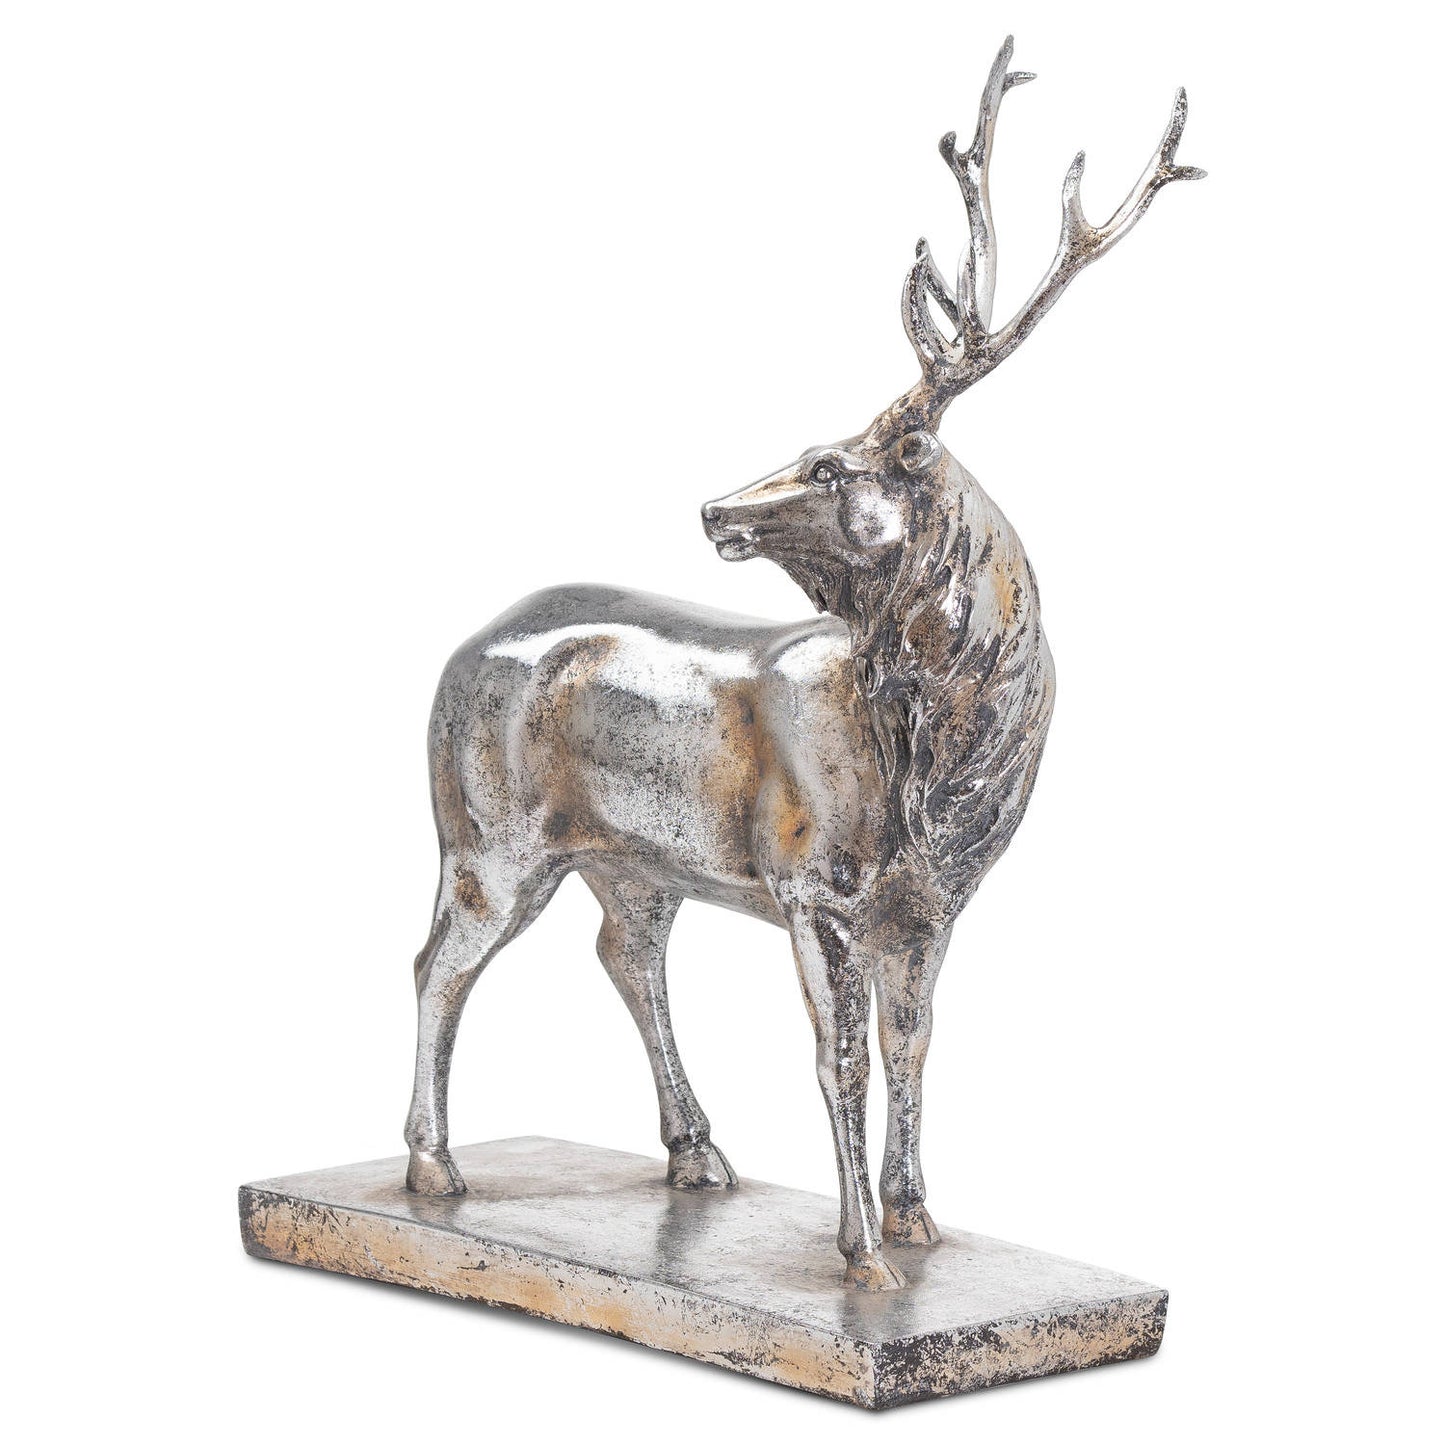 Large Standing Decorative Silver Stag